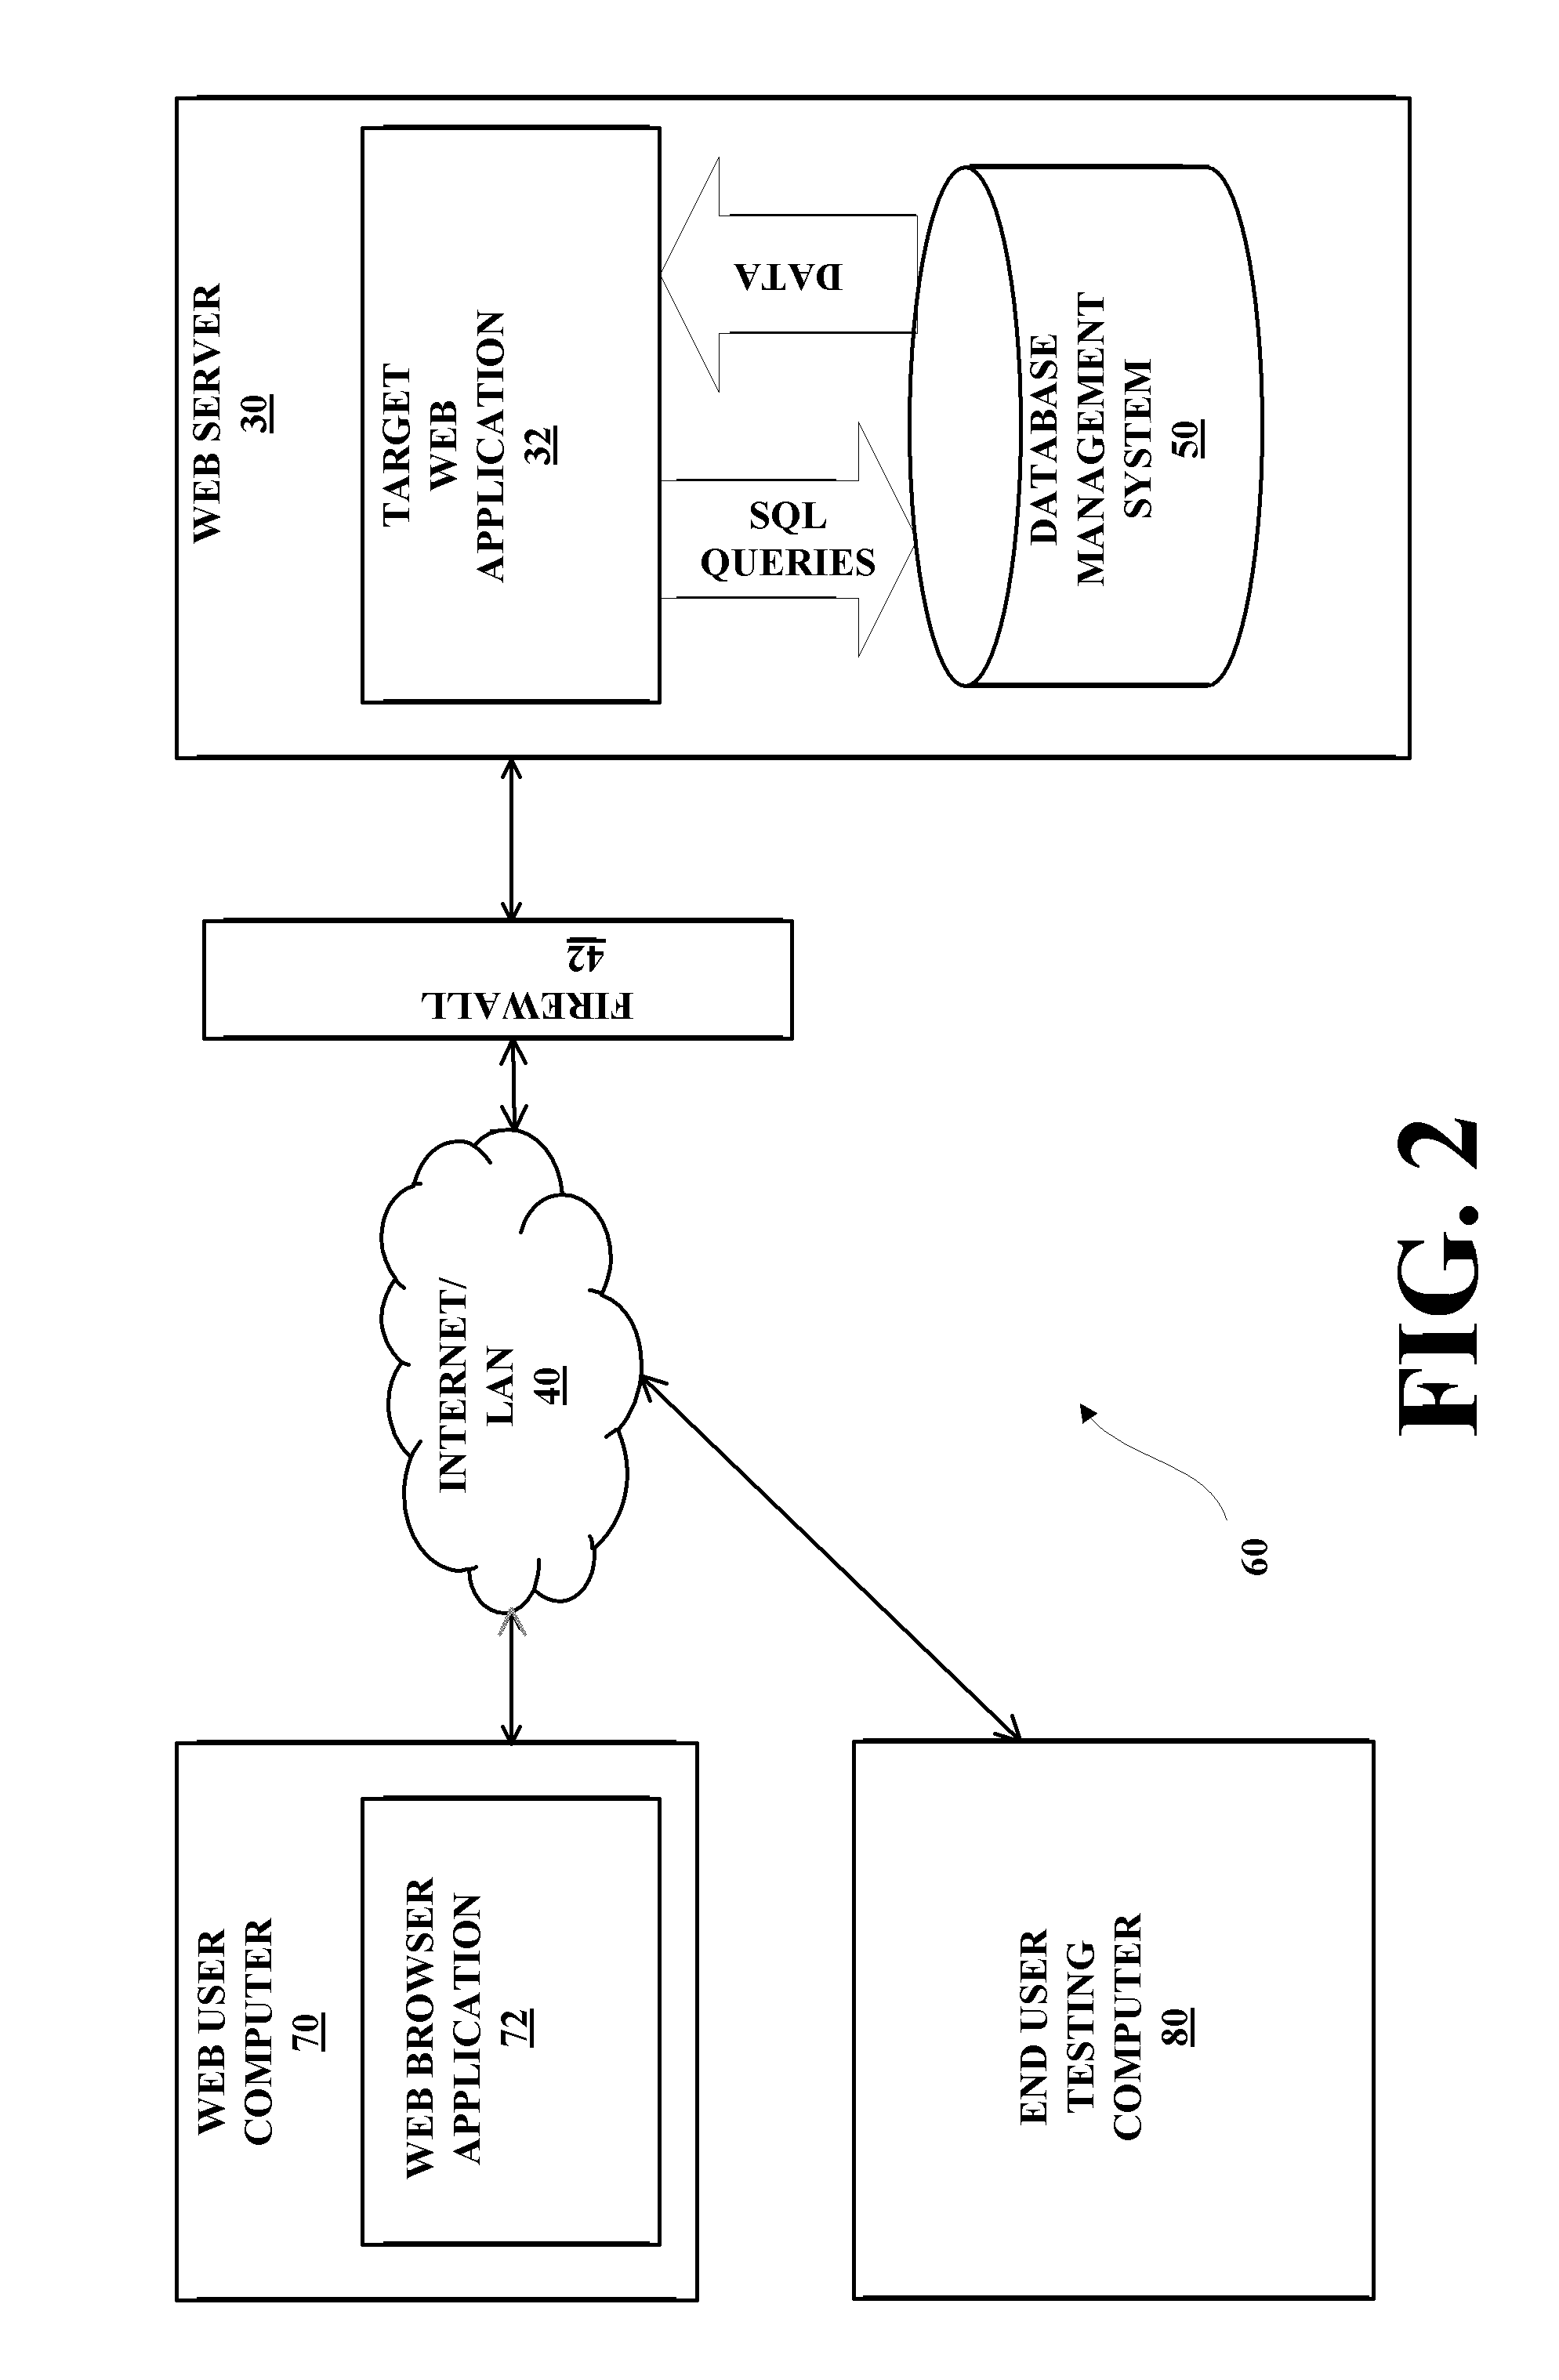 System and Method for Providing Application Penetration Testing